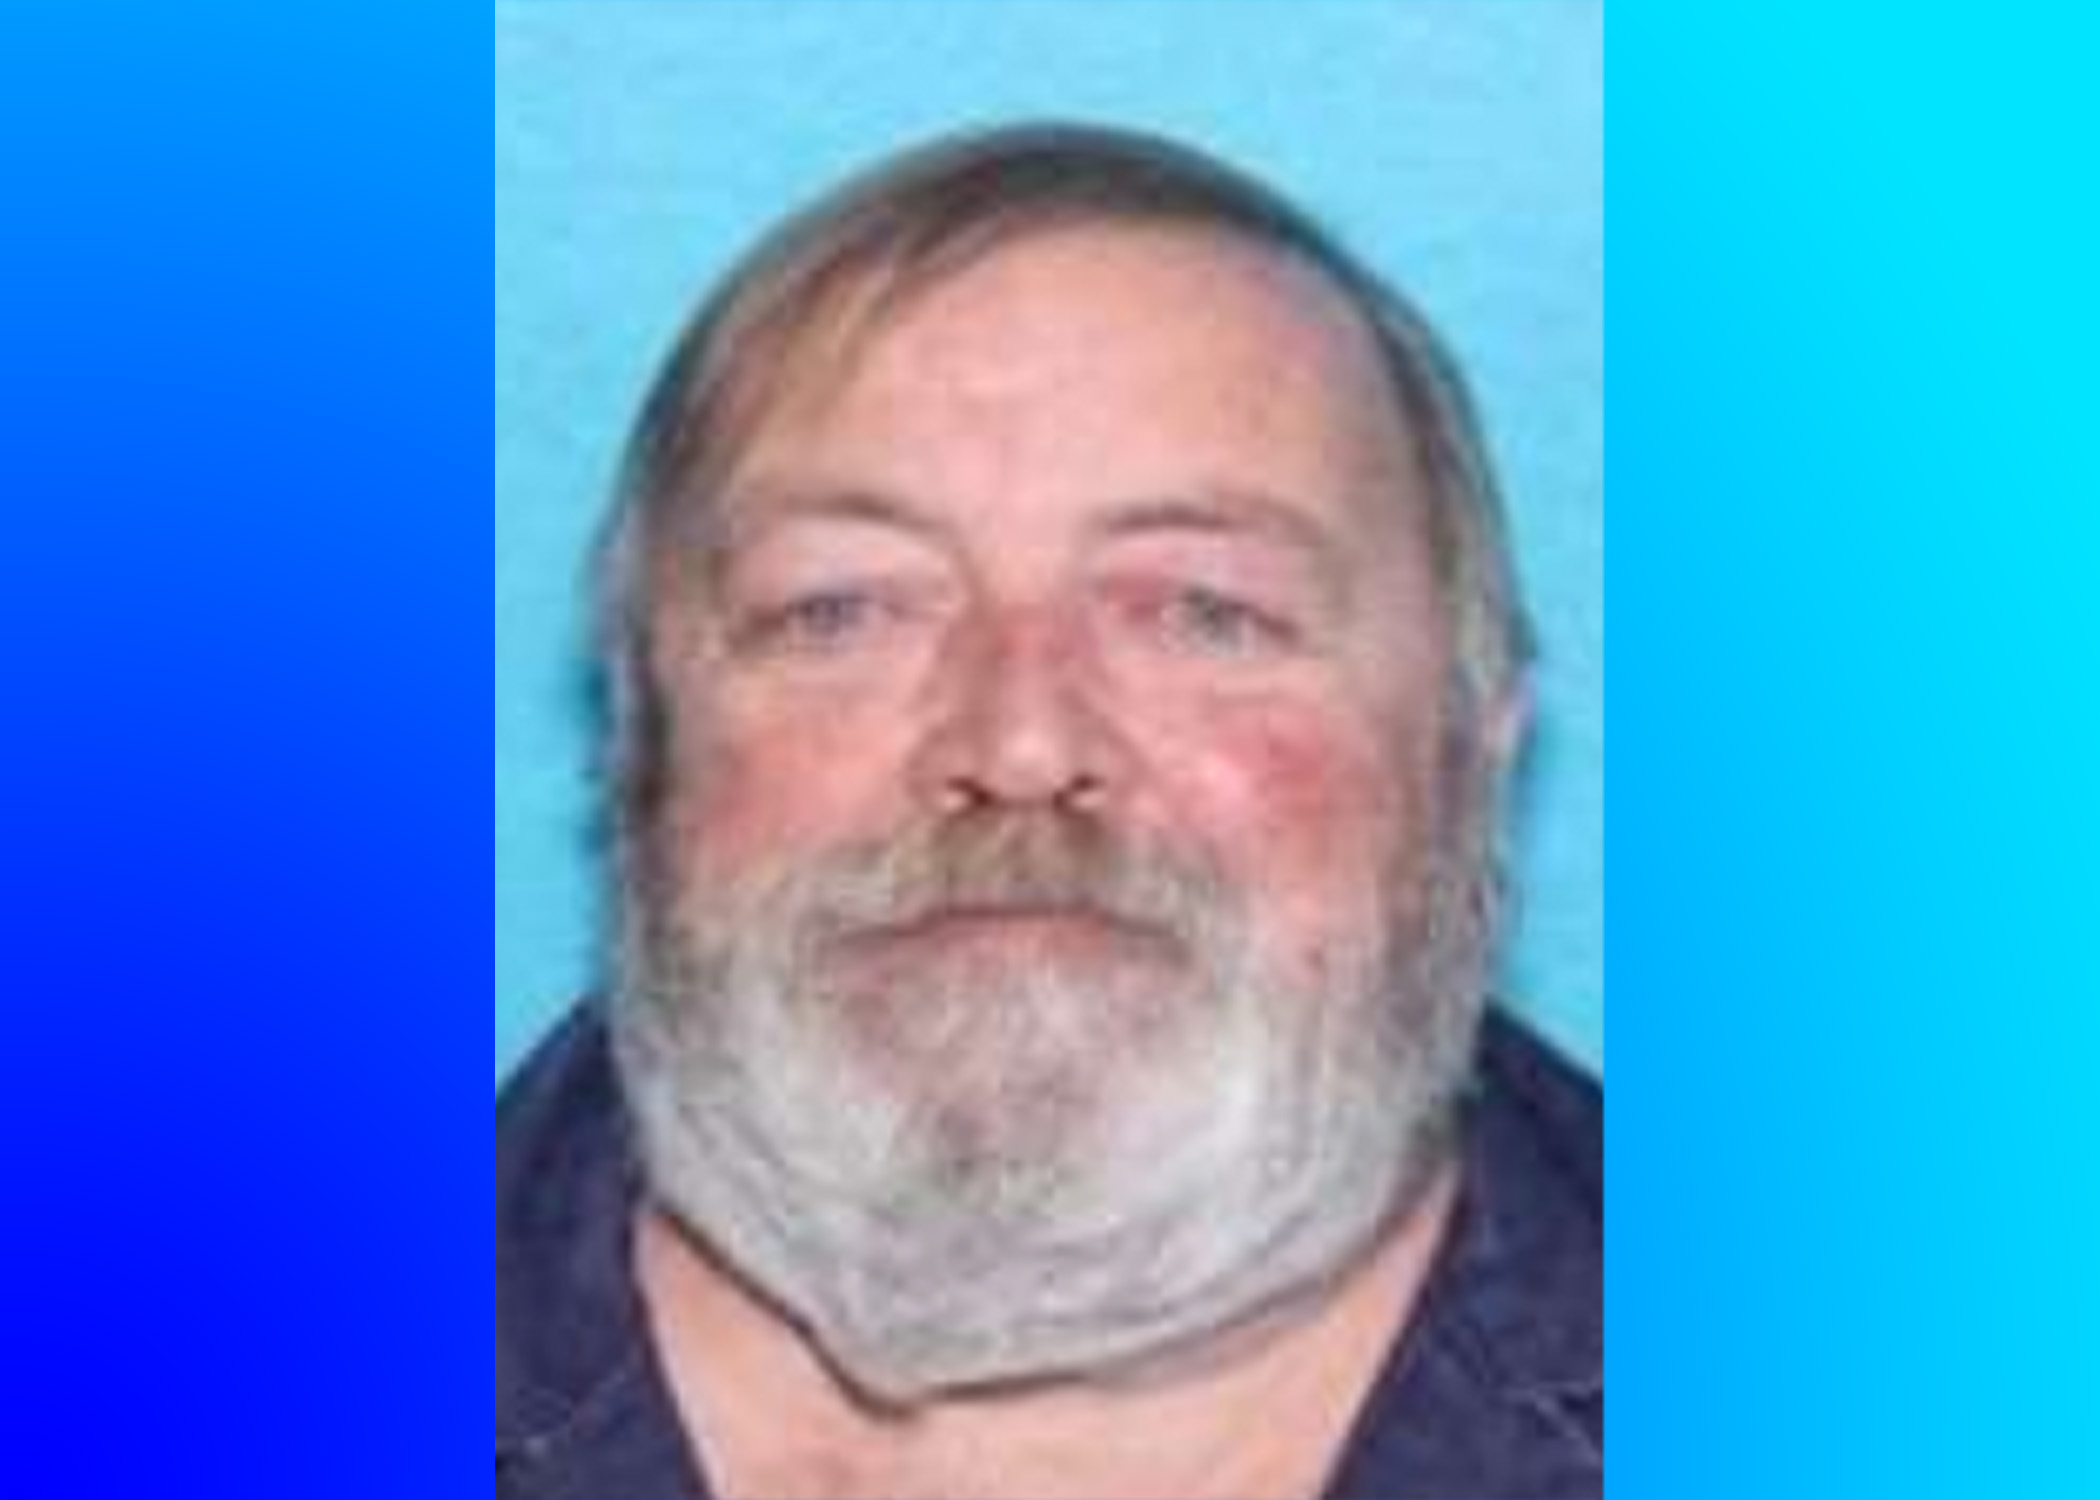 Decatur PD seeks public's assistance in locating missing man